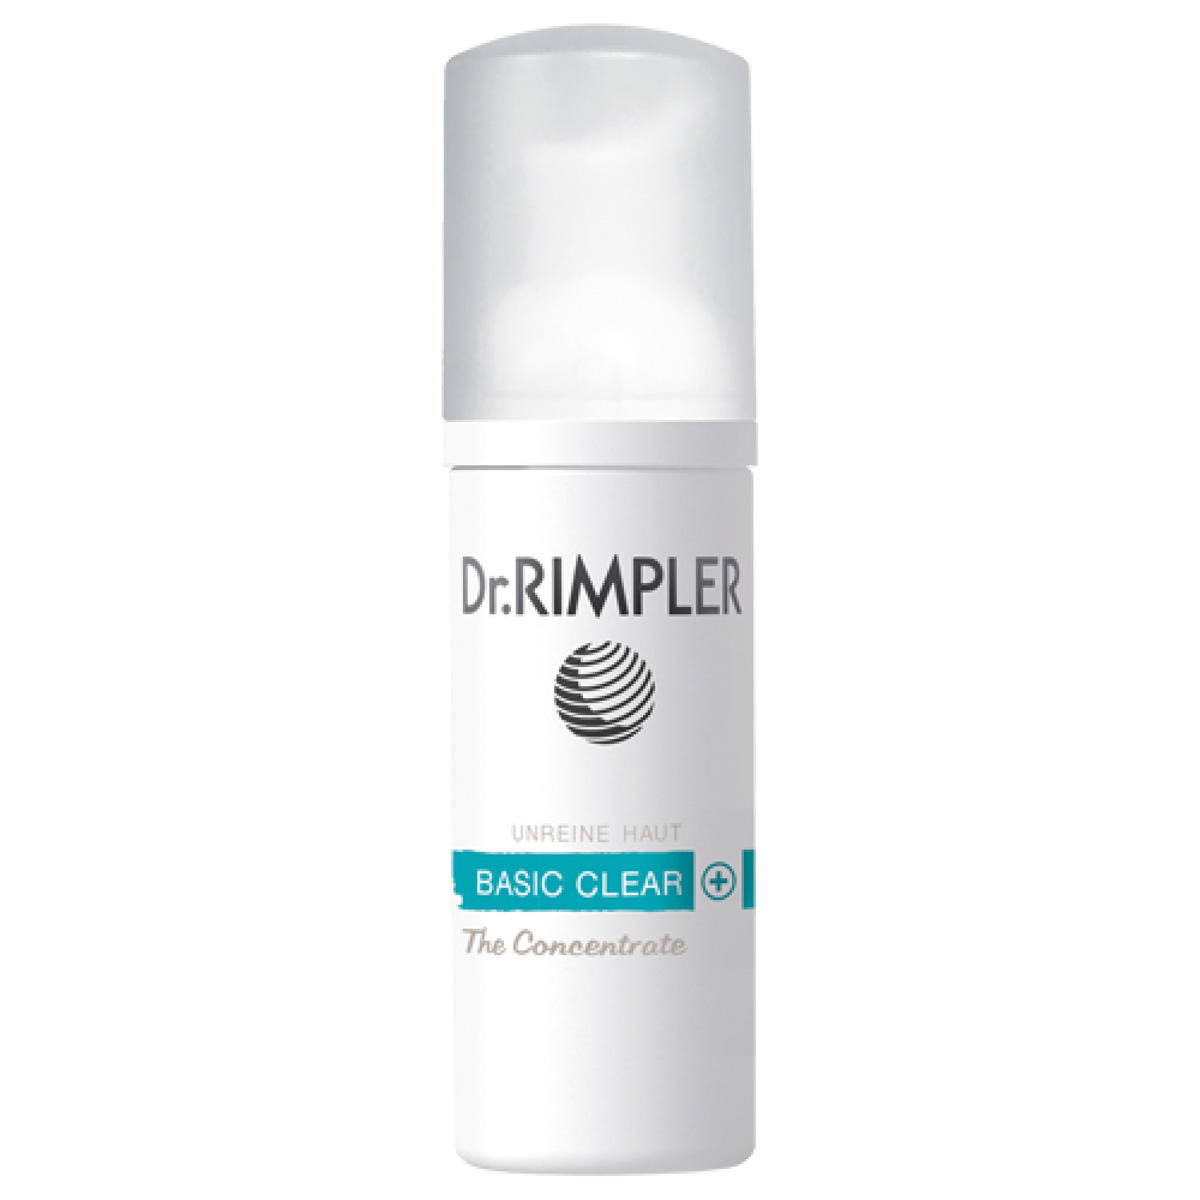 Dr. RIMPLER BASIC CLEAR+ The Concentrate 50 ml - 1